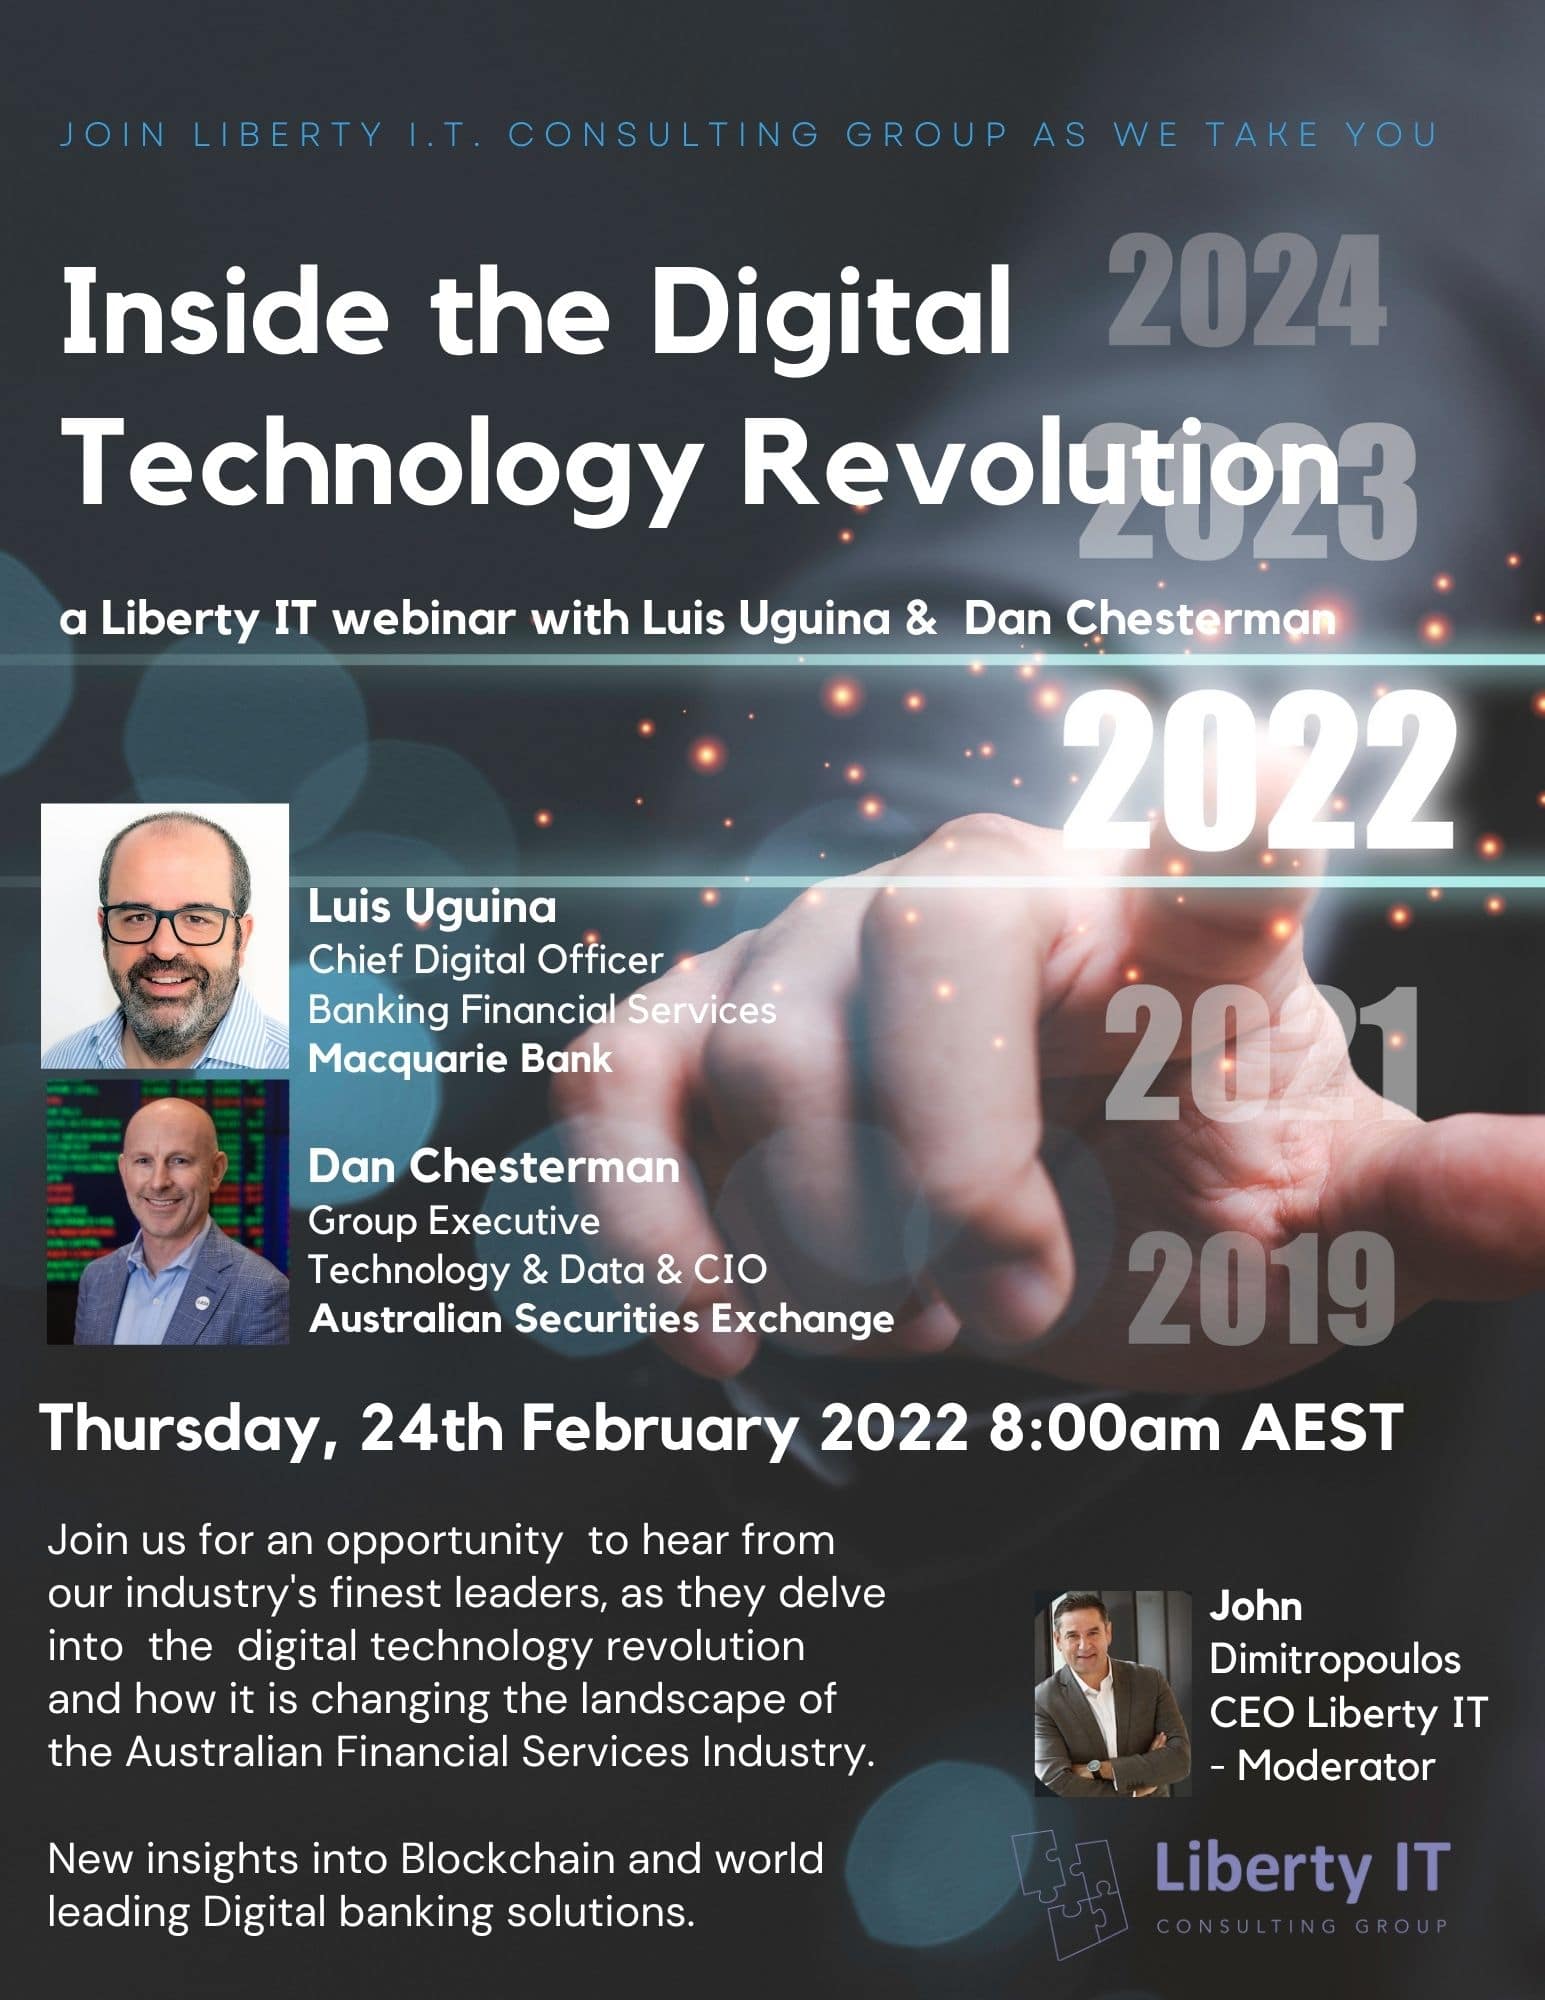 Inside the Digital Technology Revolution a Liberty IT Webinar by John Dimitropoulos featuring Luis Ugina and Dan Chesterman